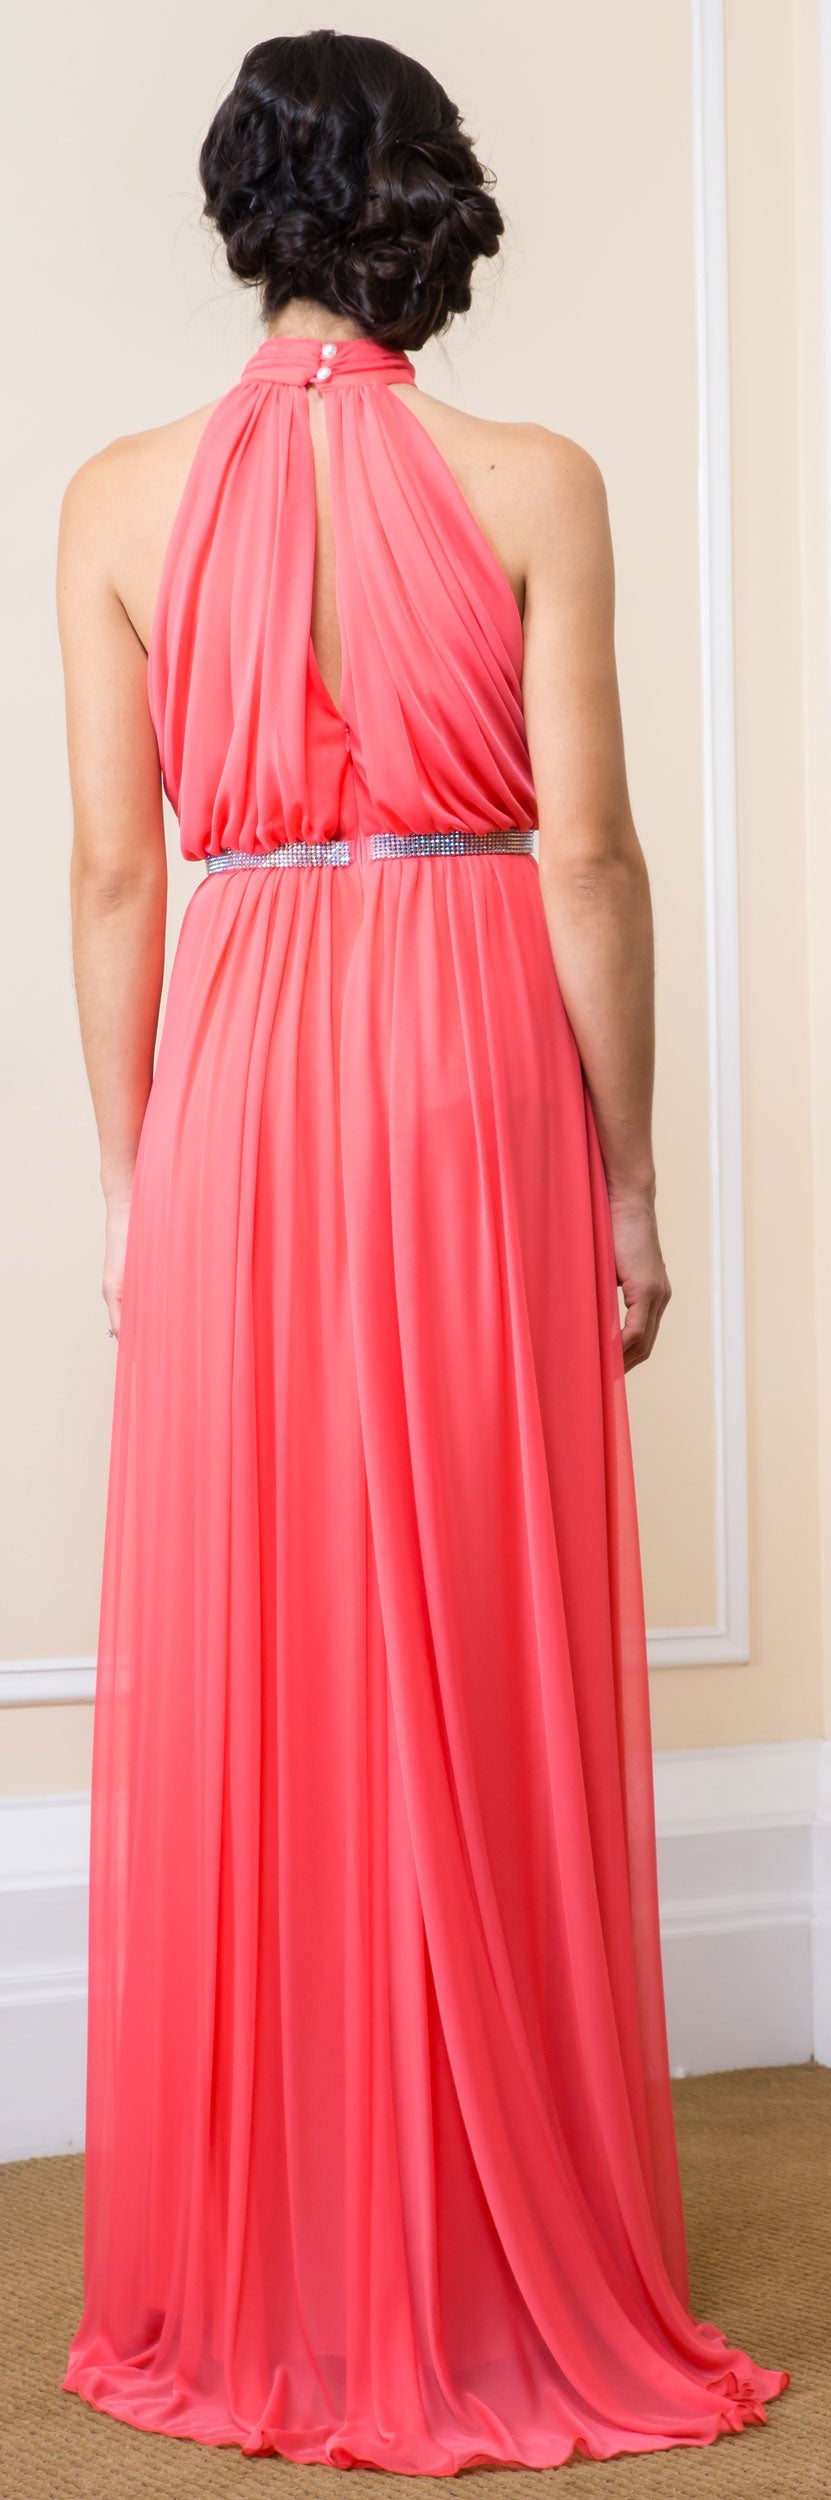 Back image of High Halter Neck Long Formal Bridesmaid Dress With Keyhole